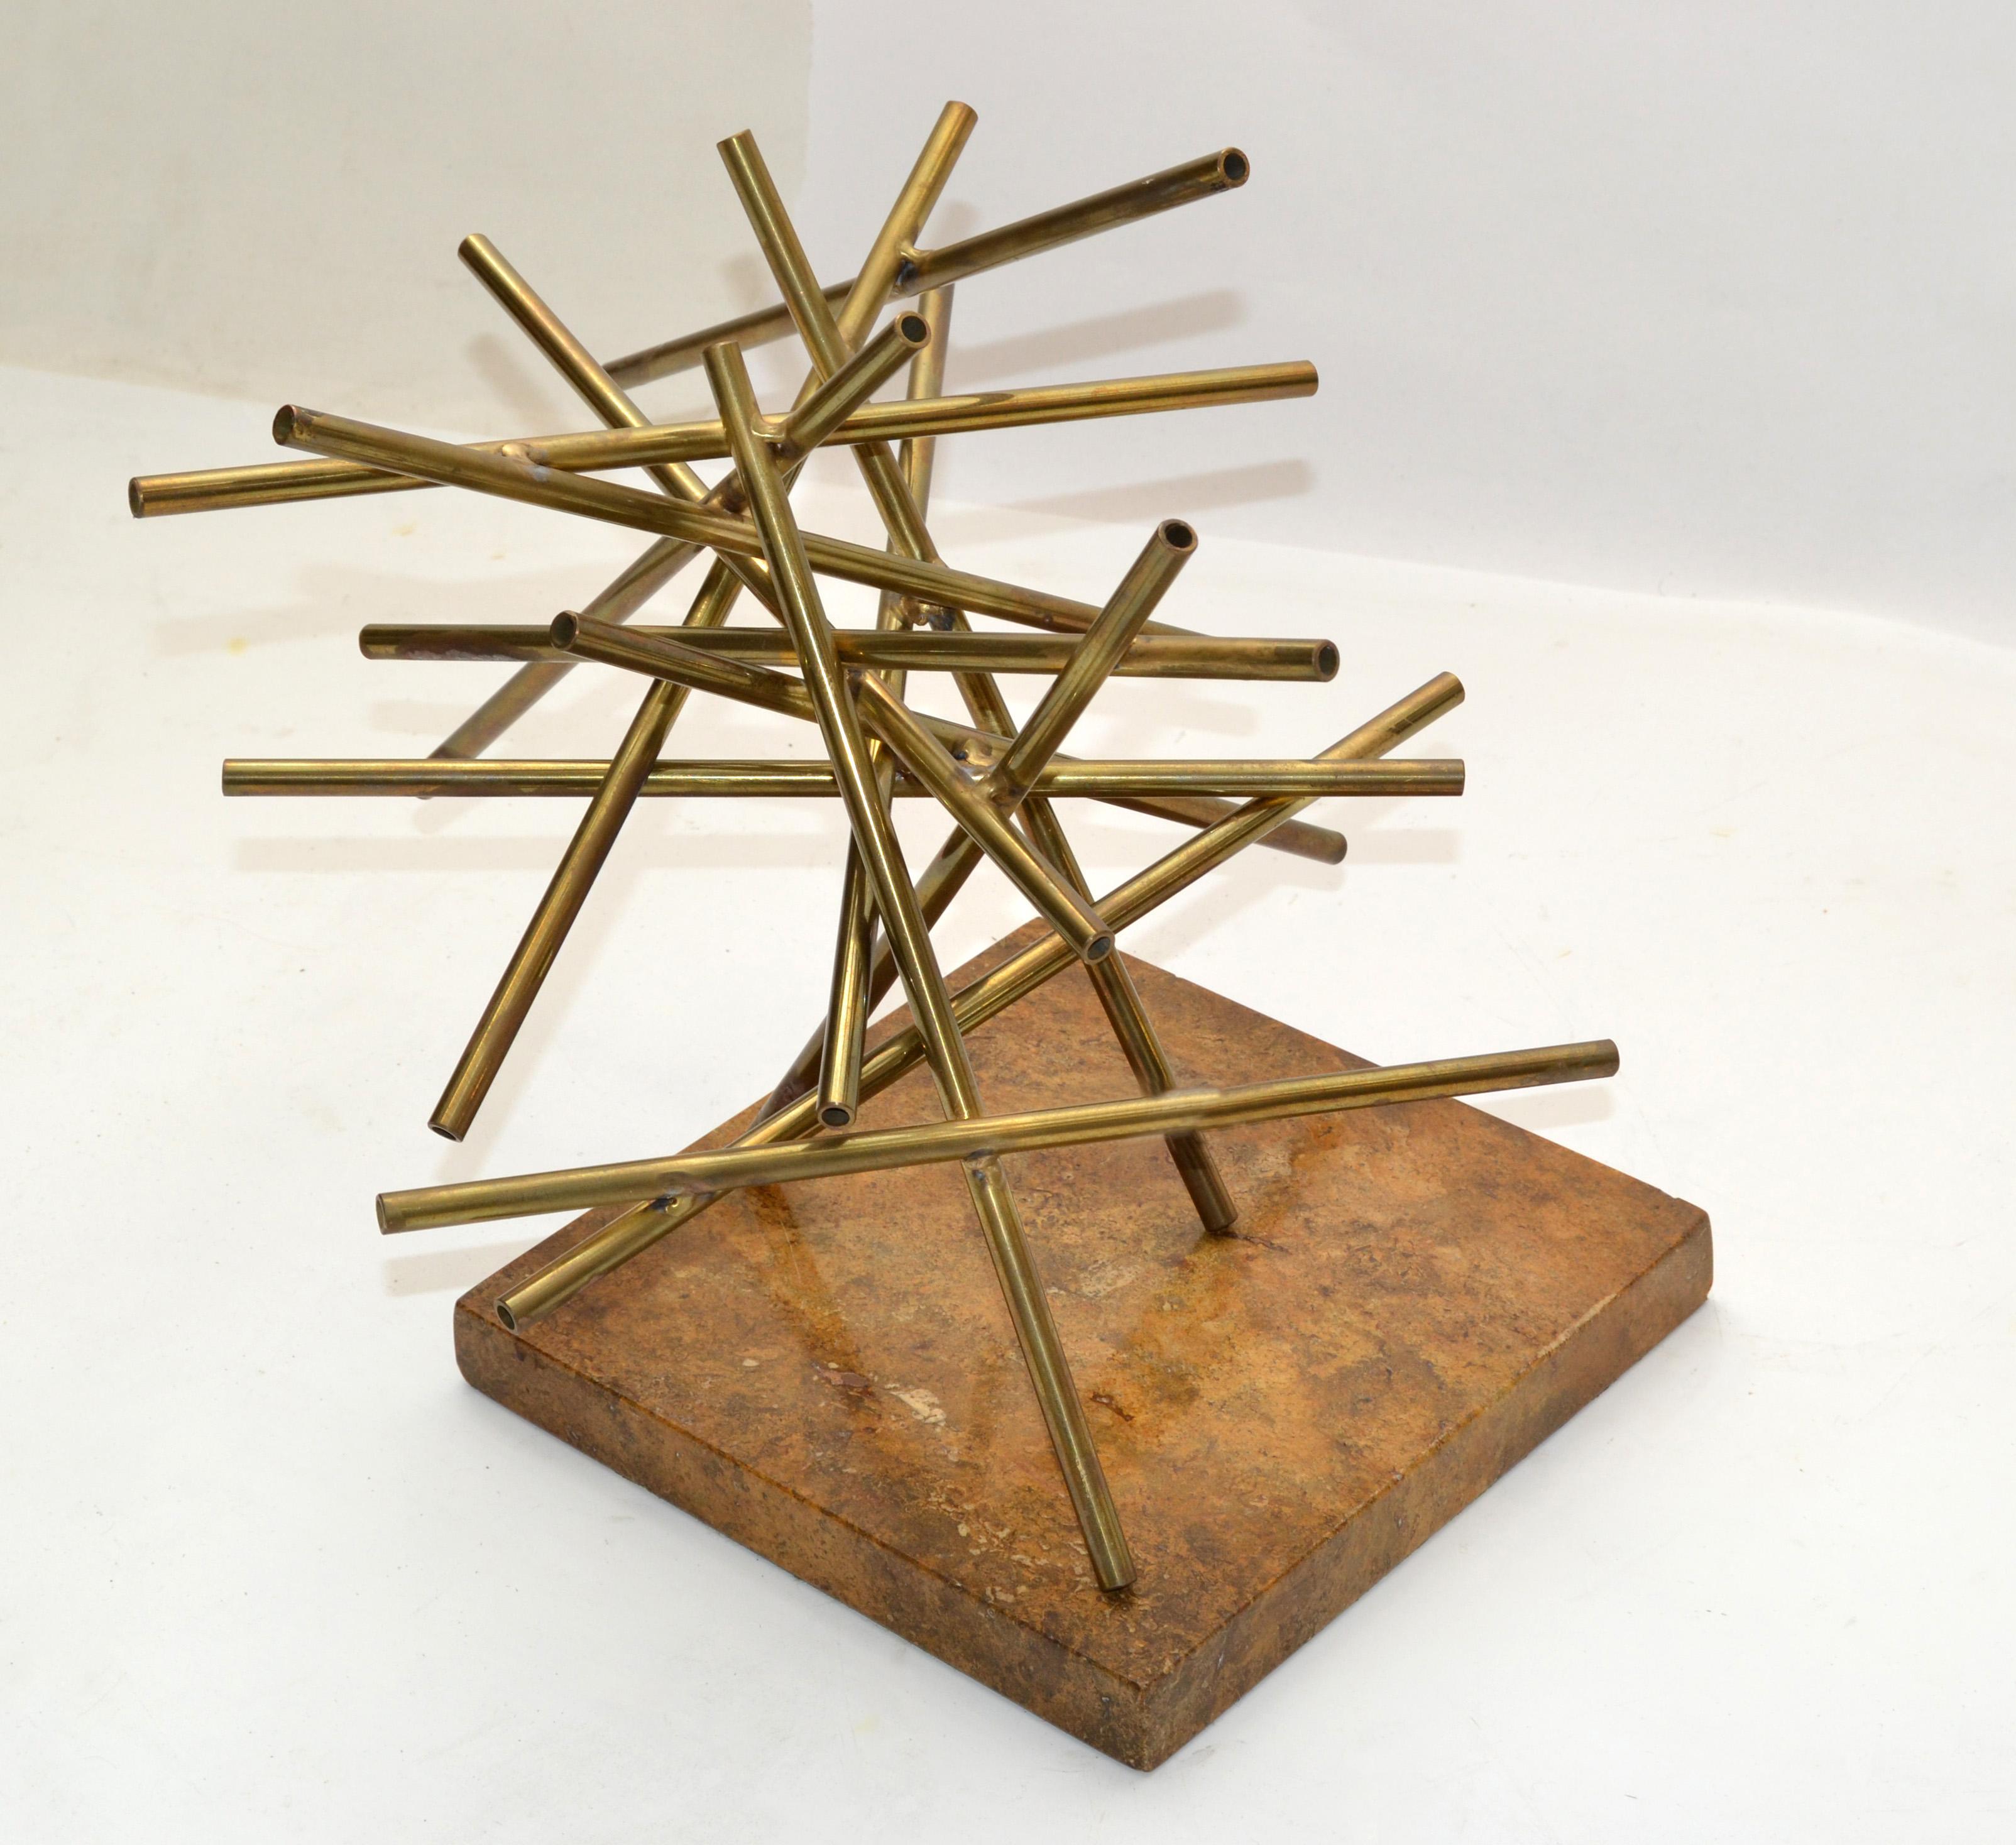 Mid-Century Modern handmade abstract geometric table sculpture made out of tubular Brass pieces welded together and placed on a square brown Marble Base.
The marble base is covered with a green felt.
Stunner done and interesting look from any